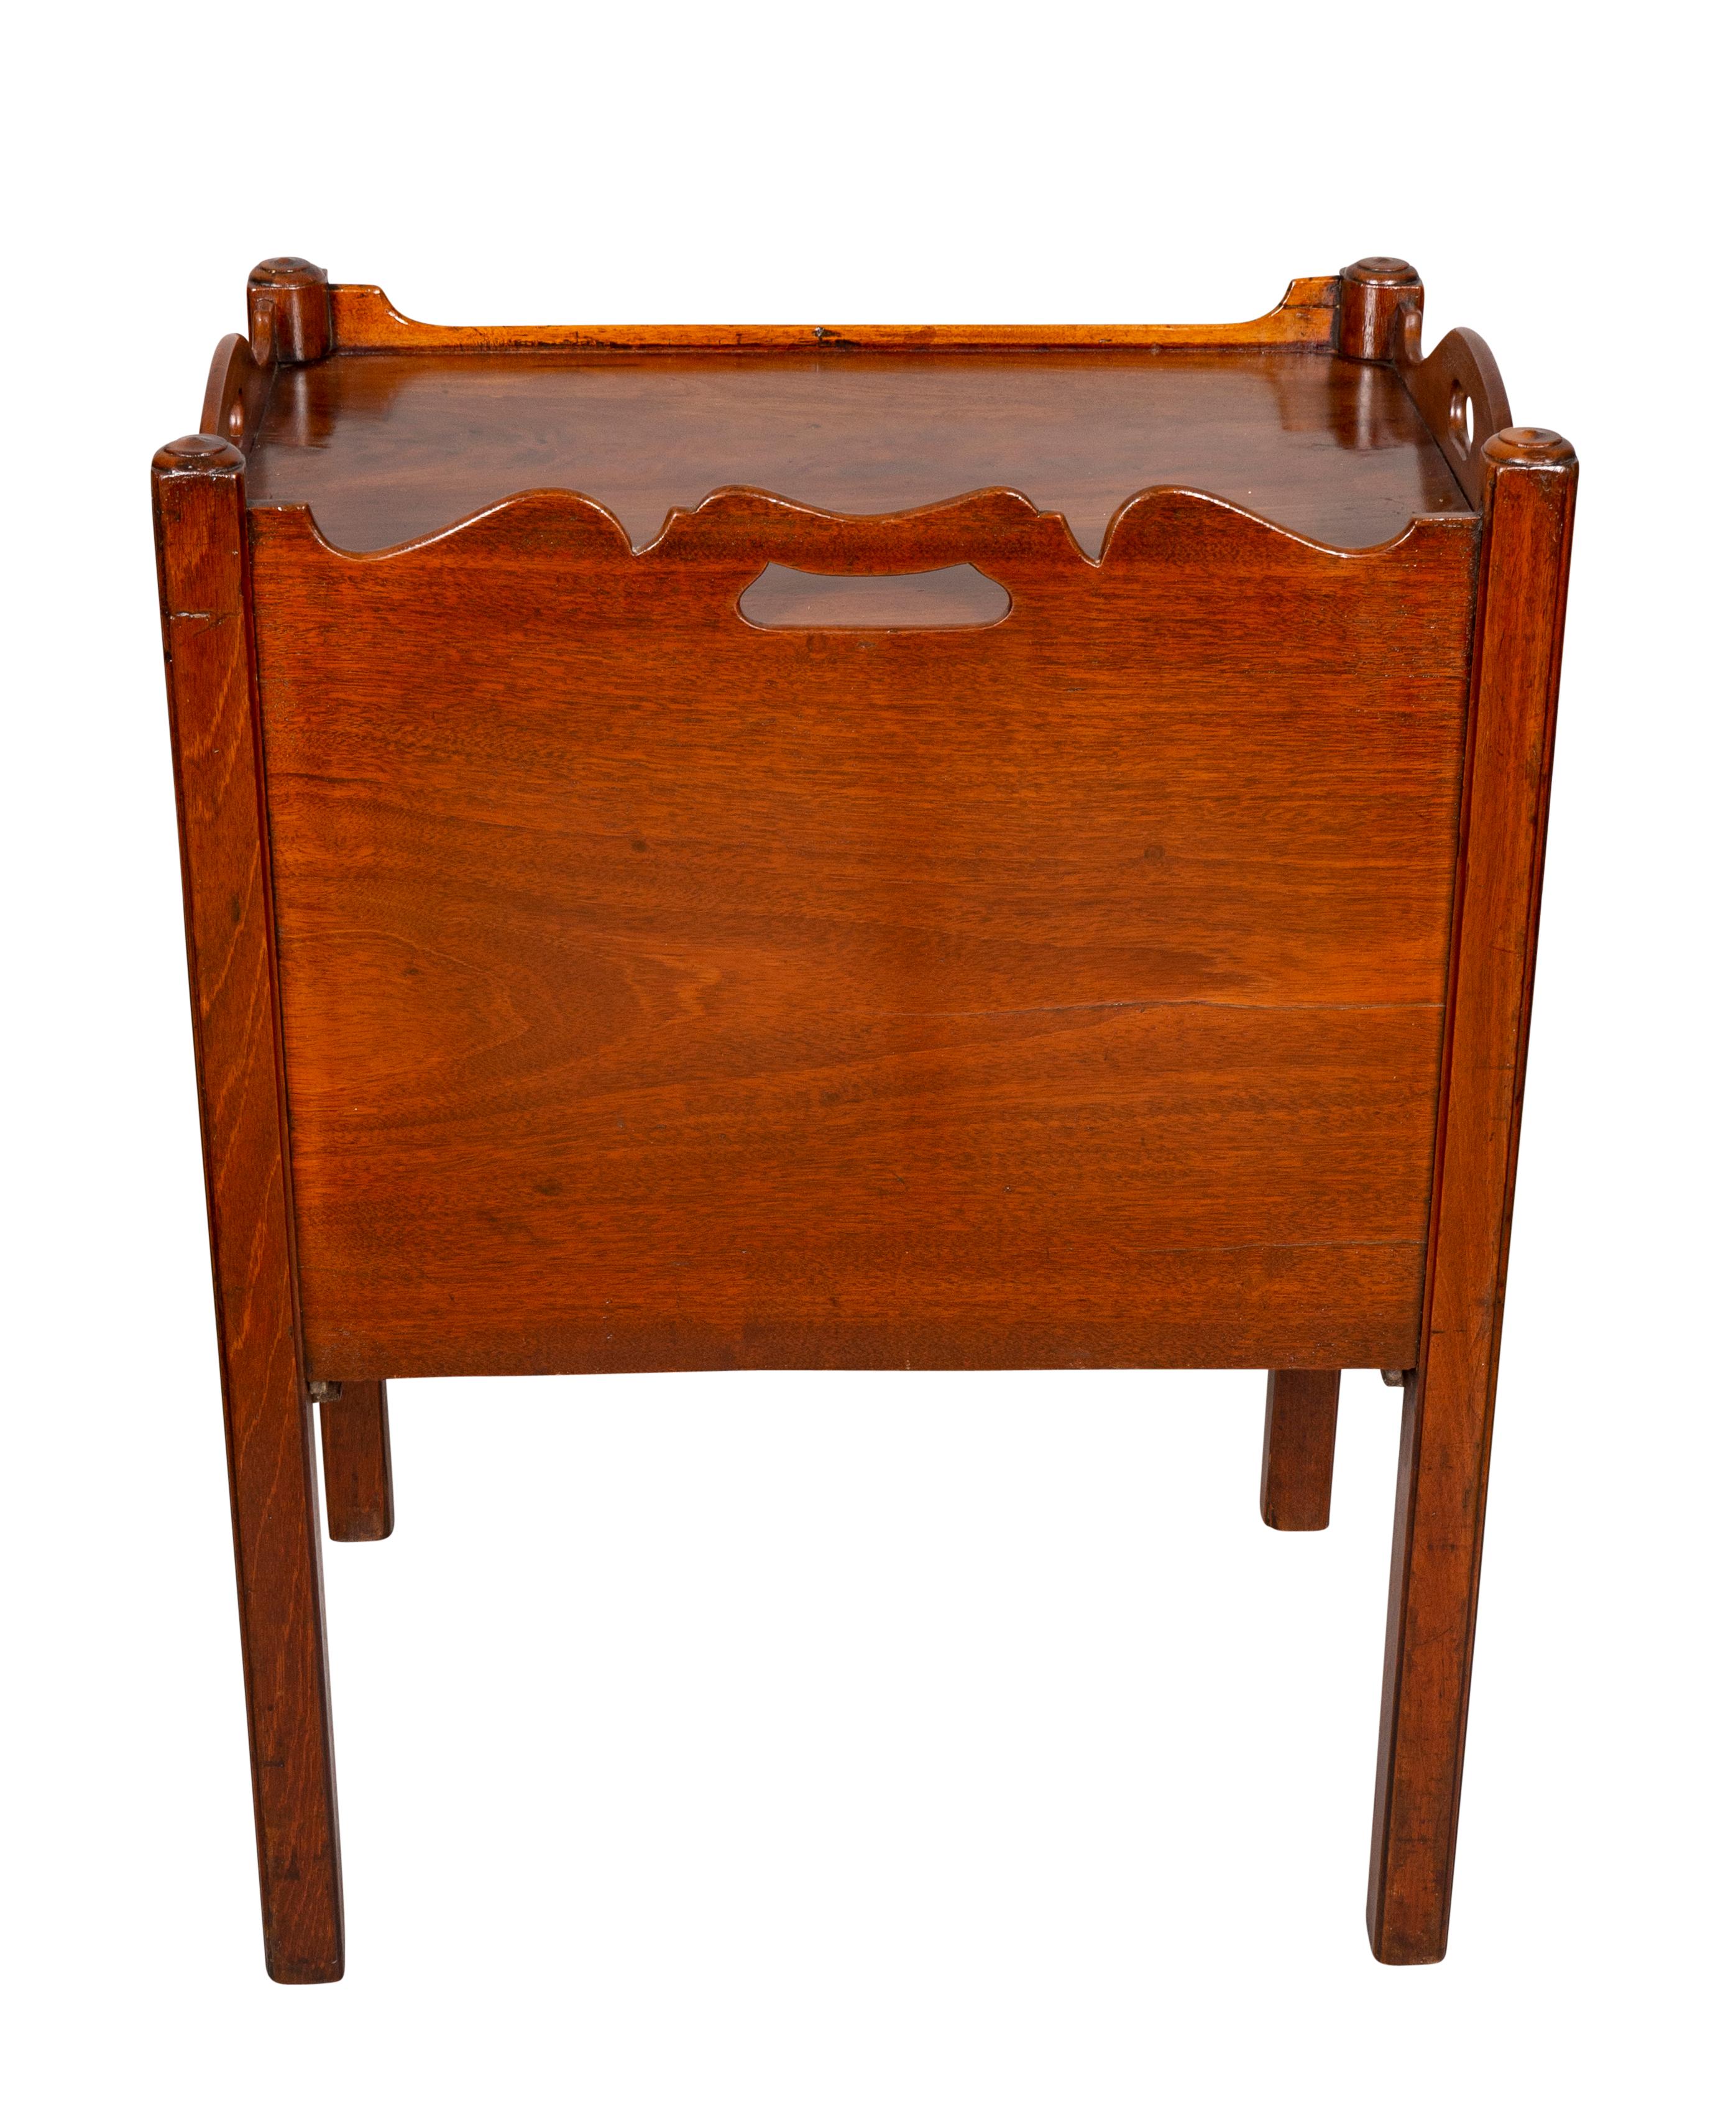 Late 18th Century George III Mahogany Bedside Cabinet For Sale